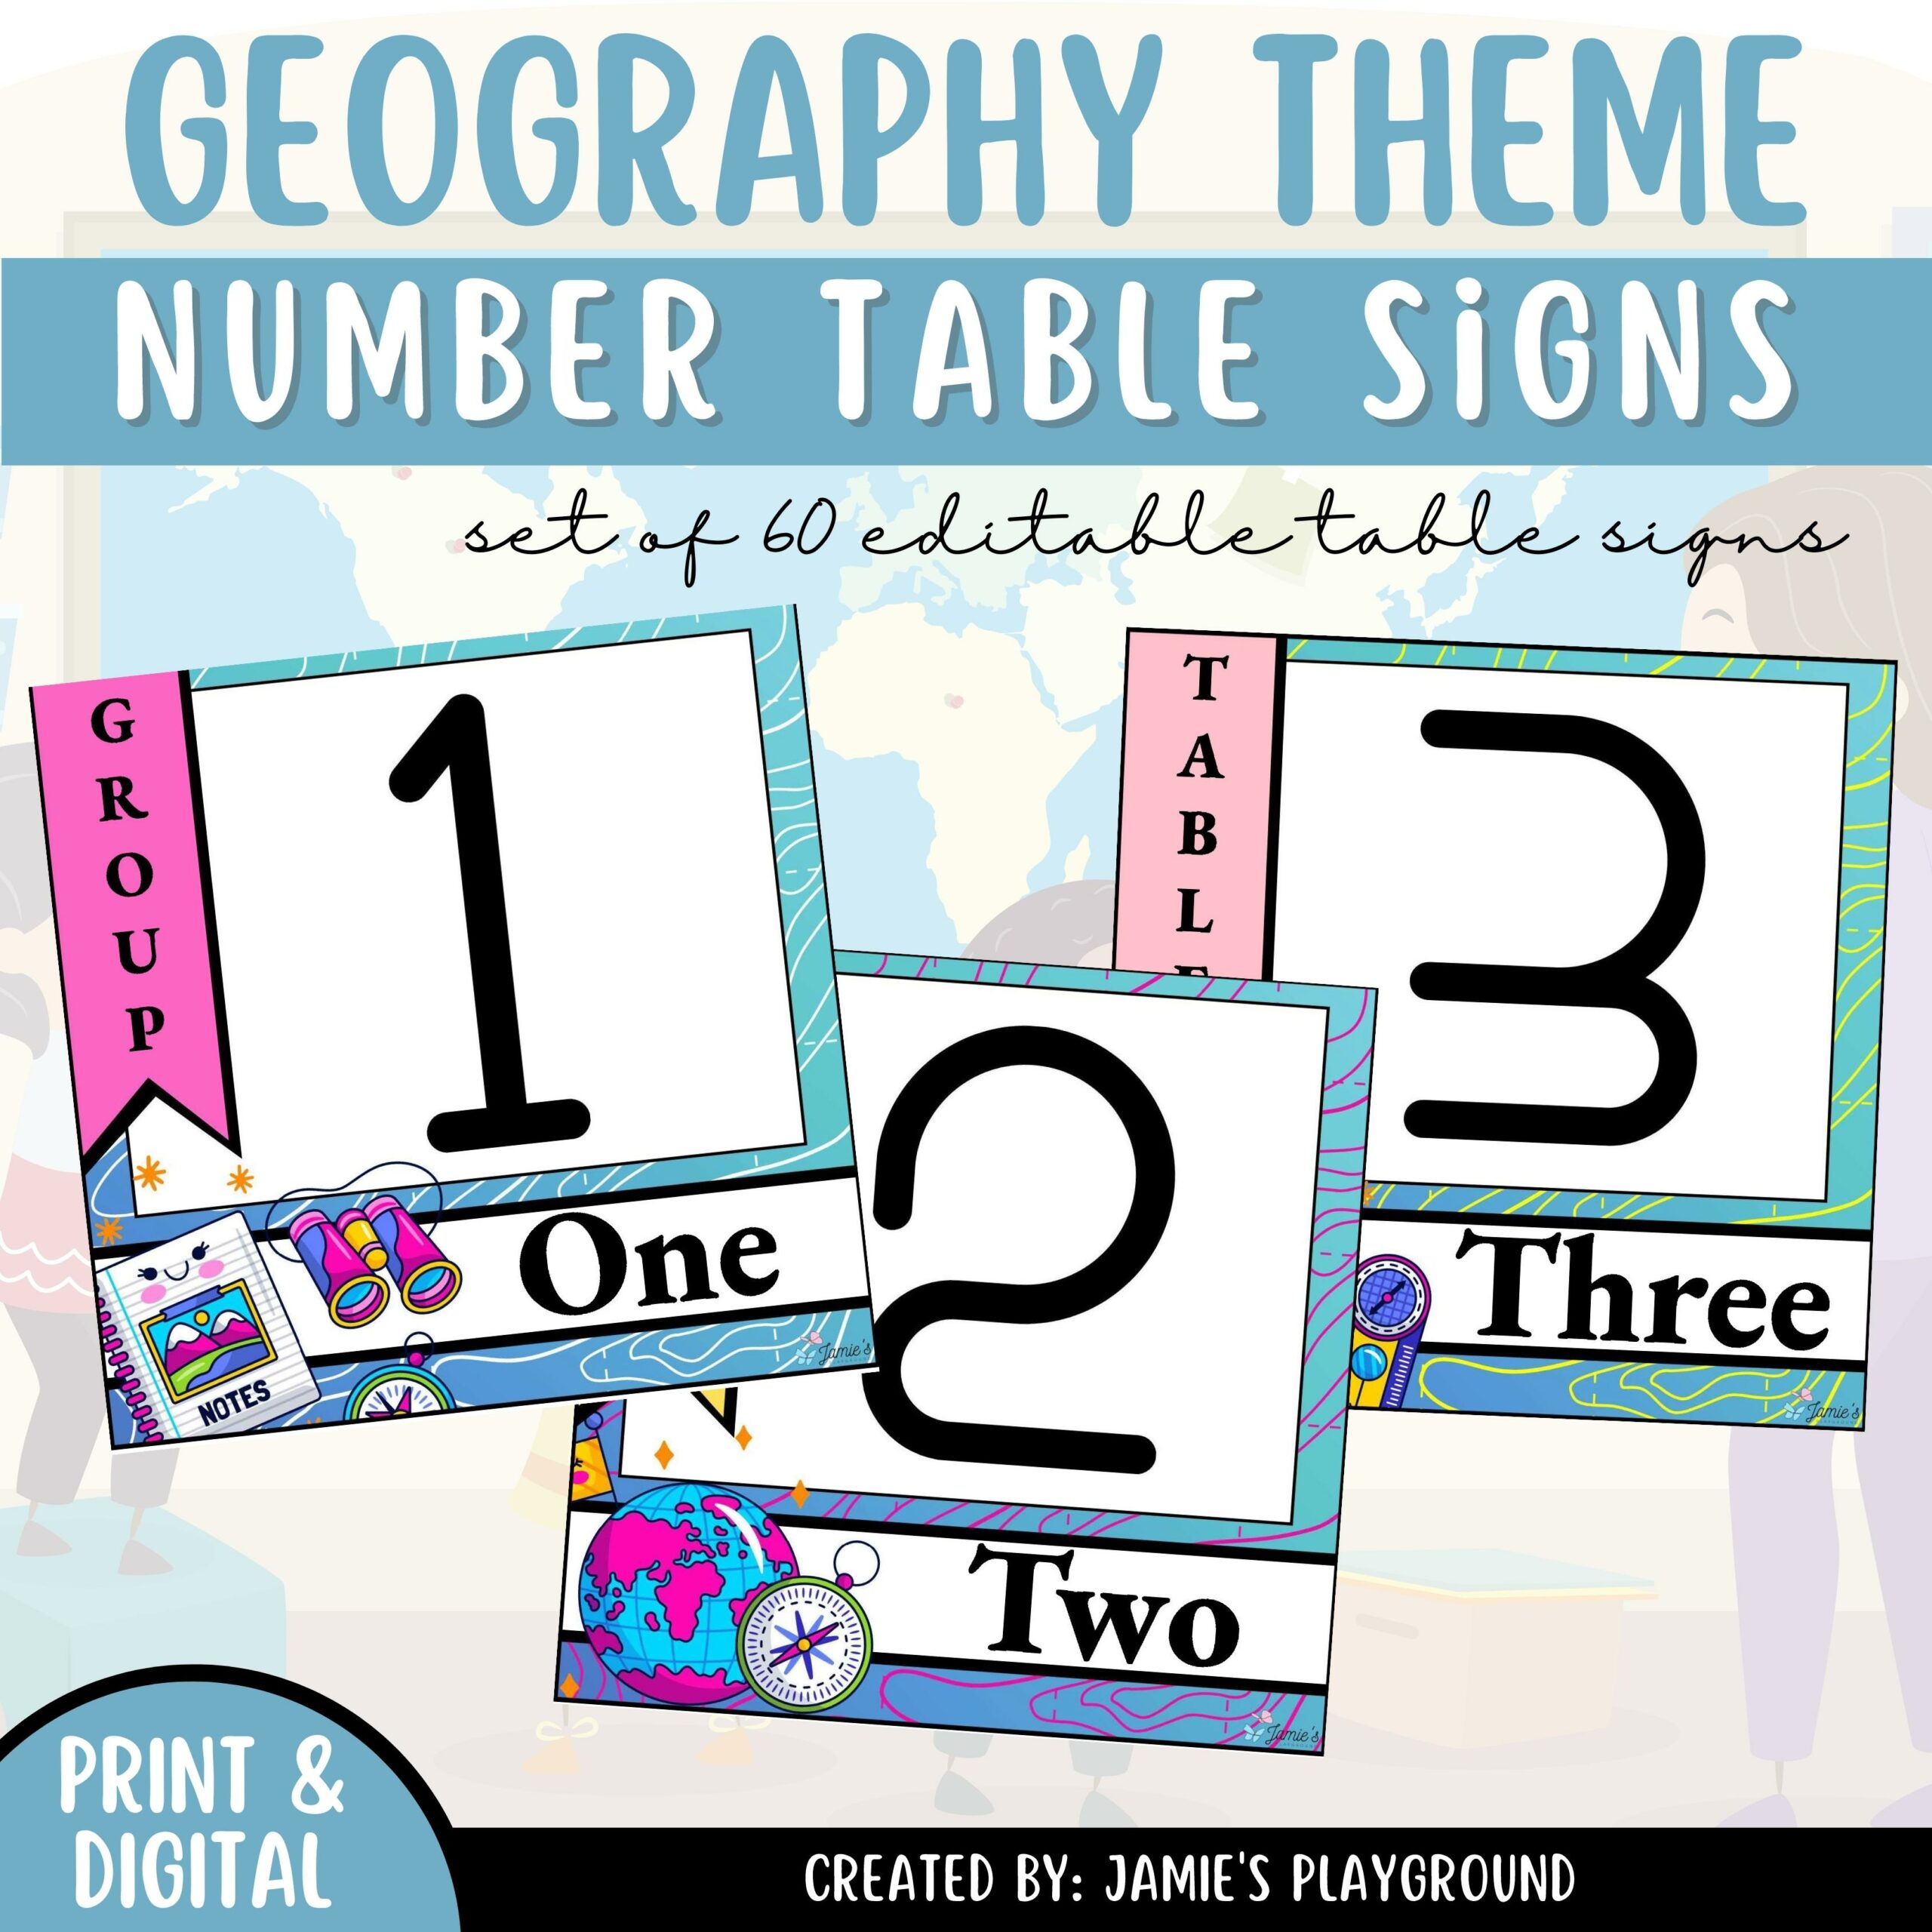 Table Number Signs - EDITABLE Geography Classroom Decor Table/Group Signs